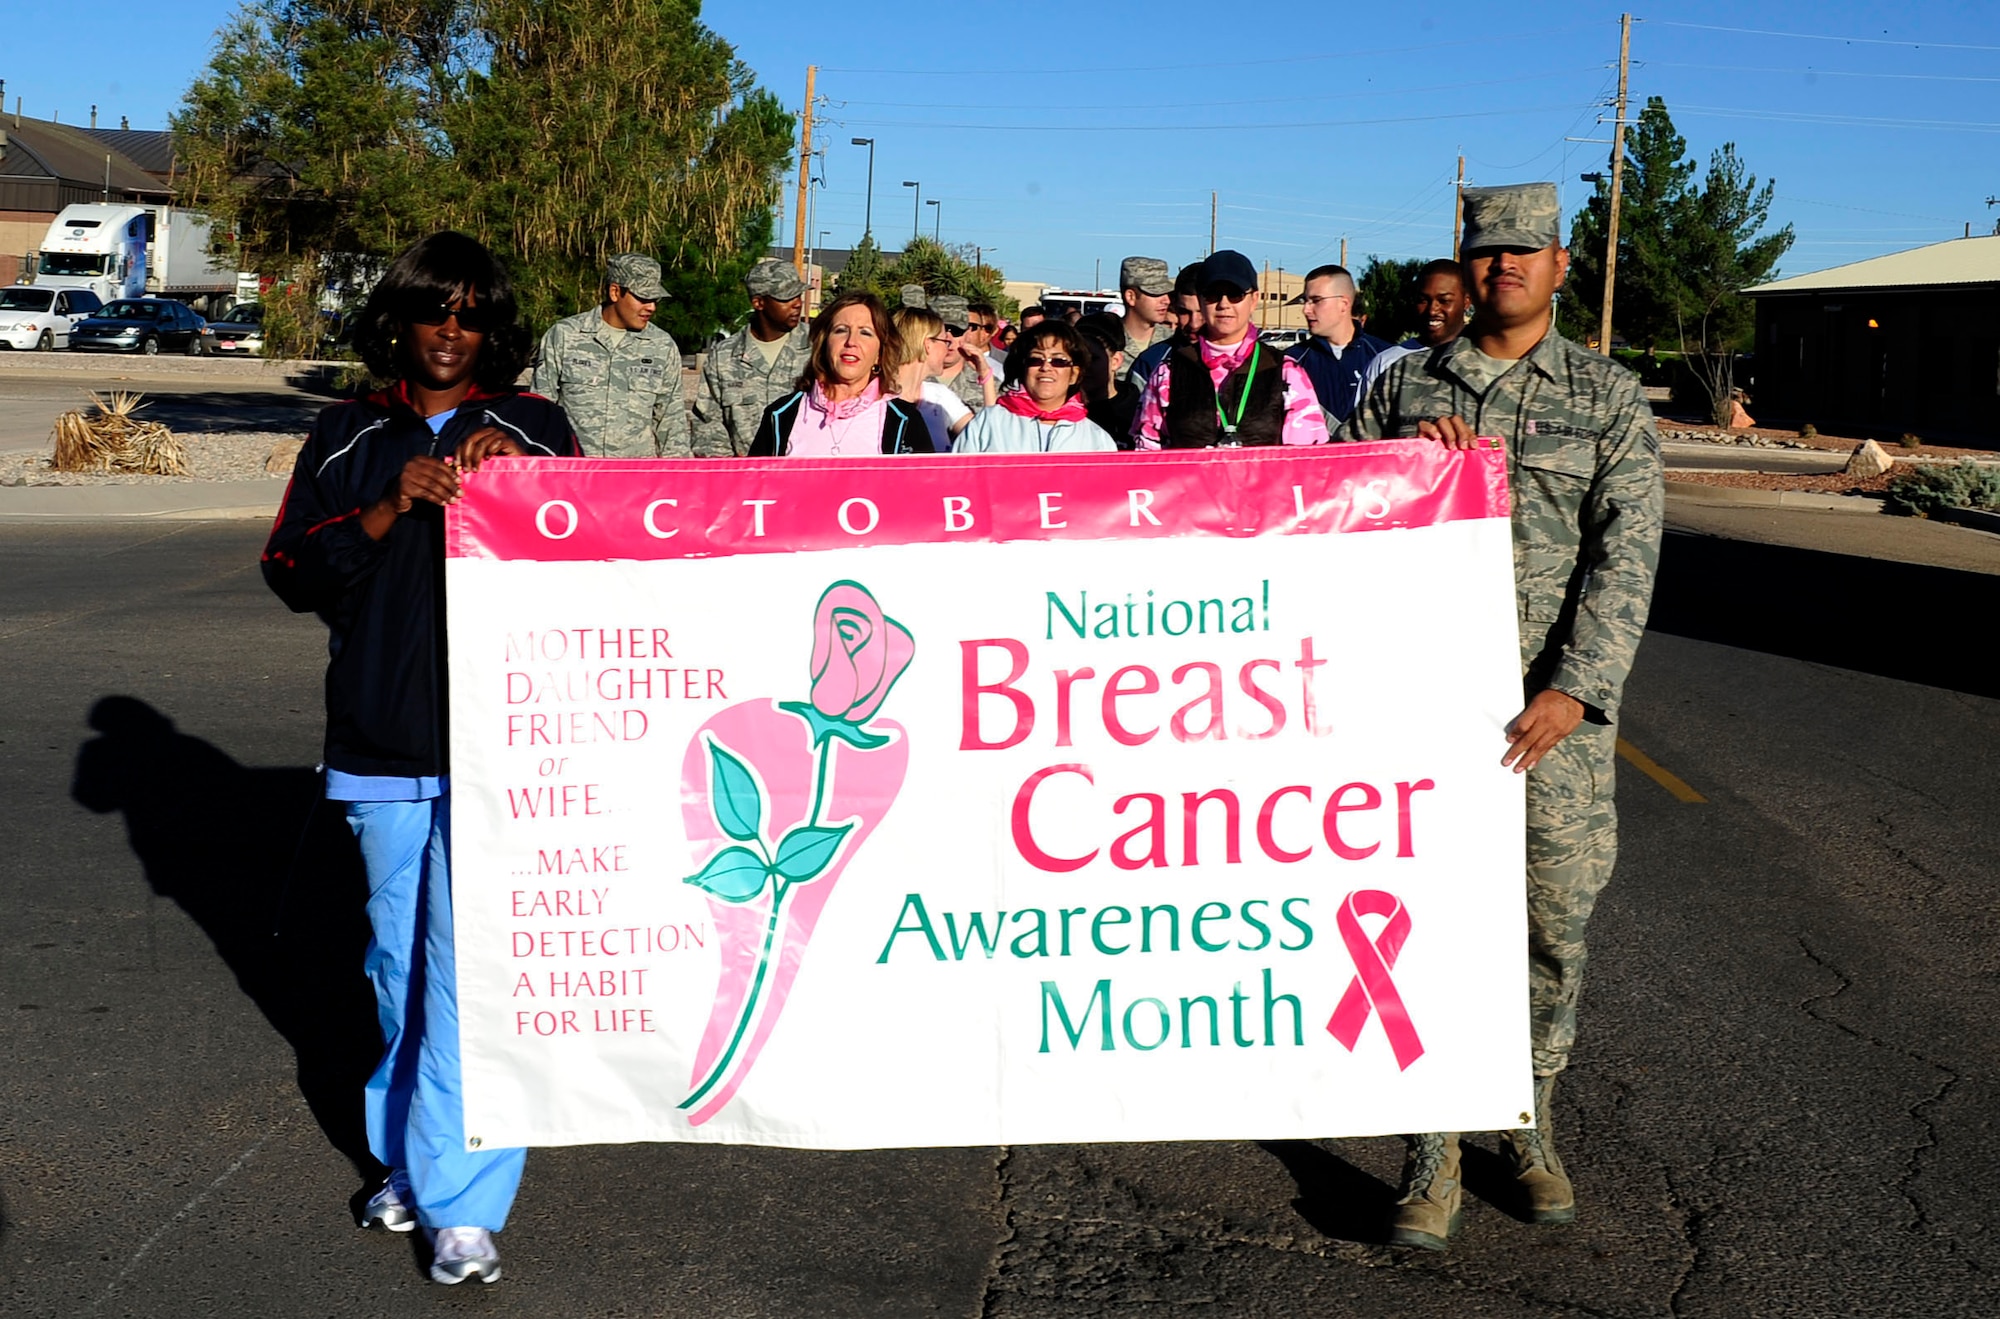 HOLLOMAN AIR FORCE BASE, N.M. -- Members of Team Holloman walk one mile in support of National Breast Cancer Awareness Month here, Oct. 15. The NBCAM organization is a partnership of national public service organizations, professional medical associations and government agencies working together to promote breast cancer awareness, share information on the disease and provide greater access to screening services. (U.S. Air Force photo by Senior Airman Tiffany Trojca)